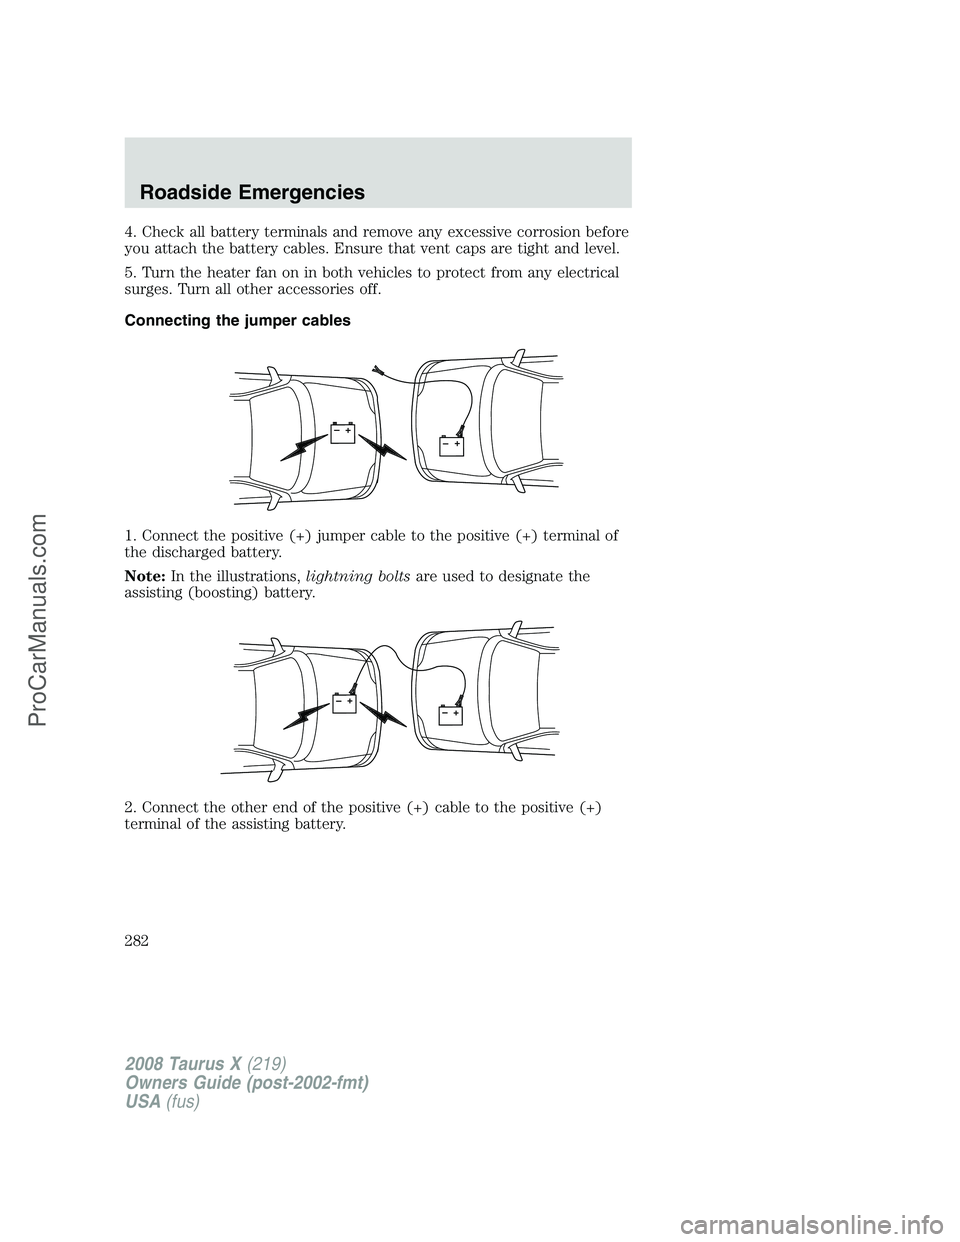 FORD FREESTYLE 2008  Owners Manual 4. Check all battery terminals and remove any excessive corrosion before
you attach the battery cables. Ensure that vent caps are tight and level.
5. Turn the heater fan on in both vehicles to protect